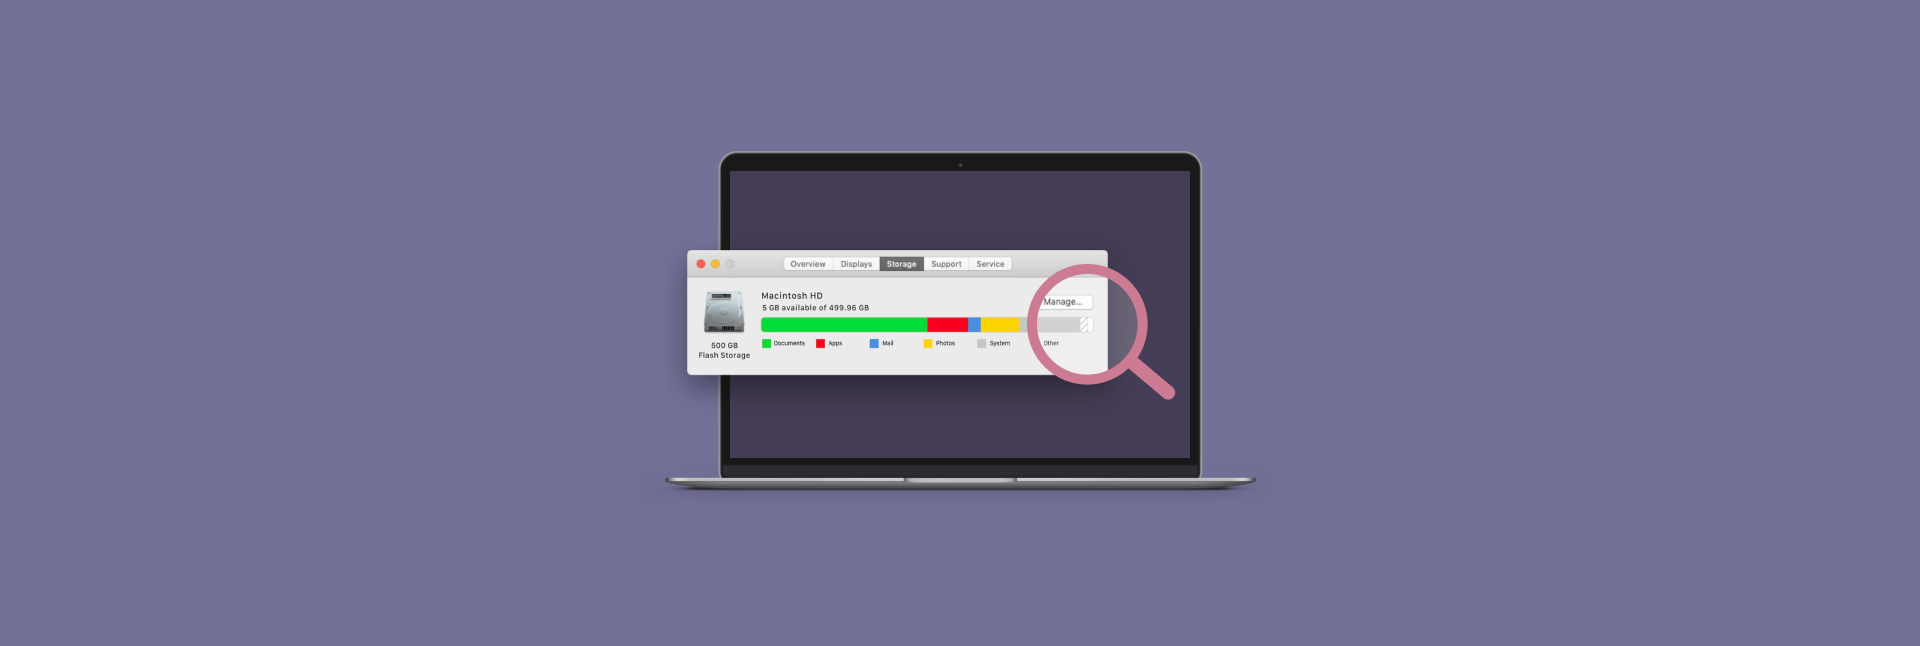 How to free up storage space on your Mac